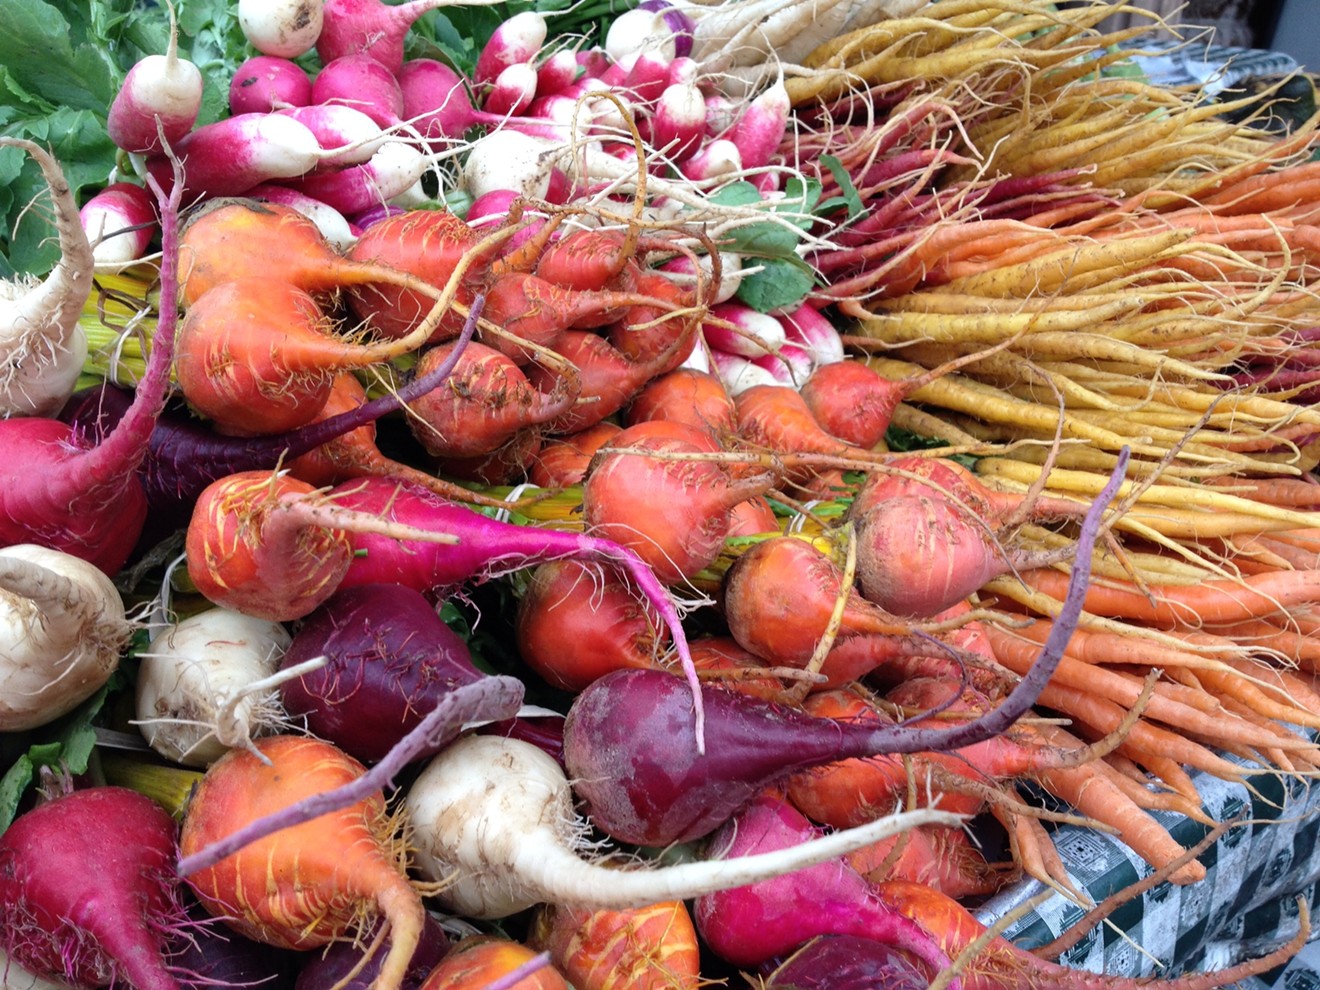 Here are 19 farmers markets set to reopen or stay open longer this fall in the Valley.